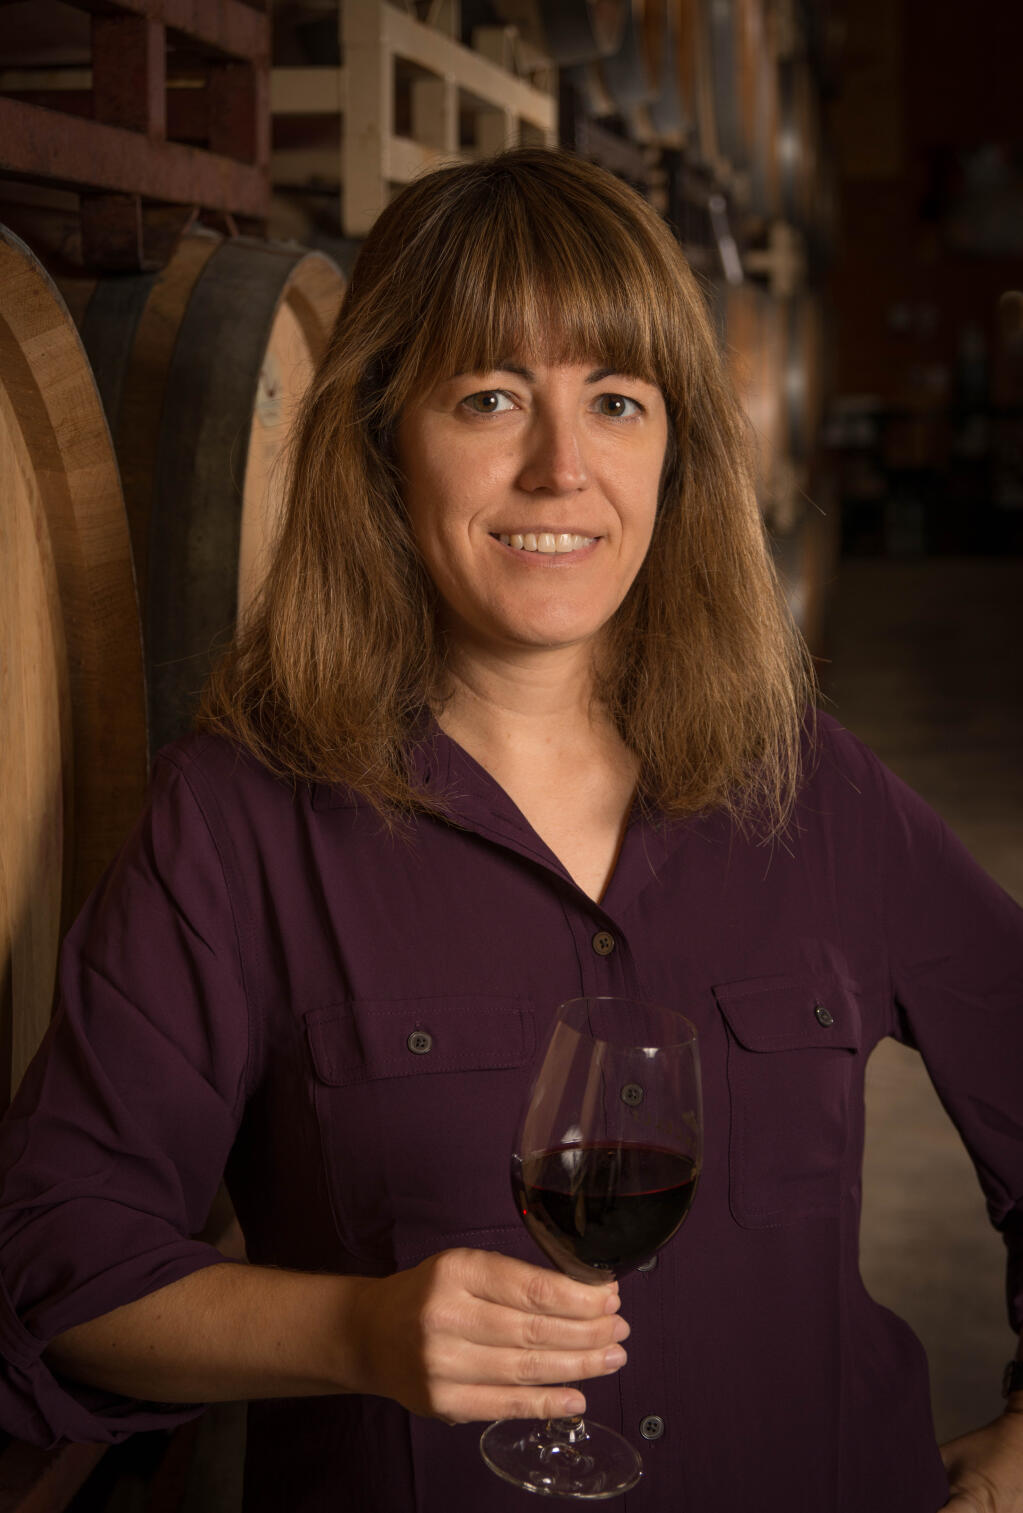 Montse Reece is the winemaker at Geyserville’s Pedroncelli Winery, and she crafted our wine of the week winner ― the Pedroncelli, 2018 Three Vineyards, Dry Creek Valley Cabernet Sauvignon, 14.2%, $22, 4 stars. (Pedroncelli Winery)